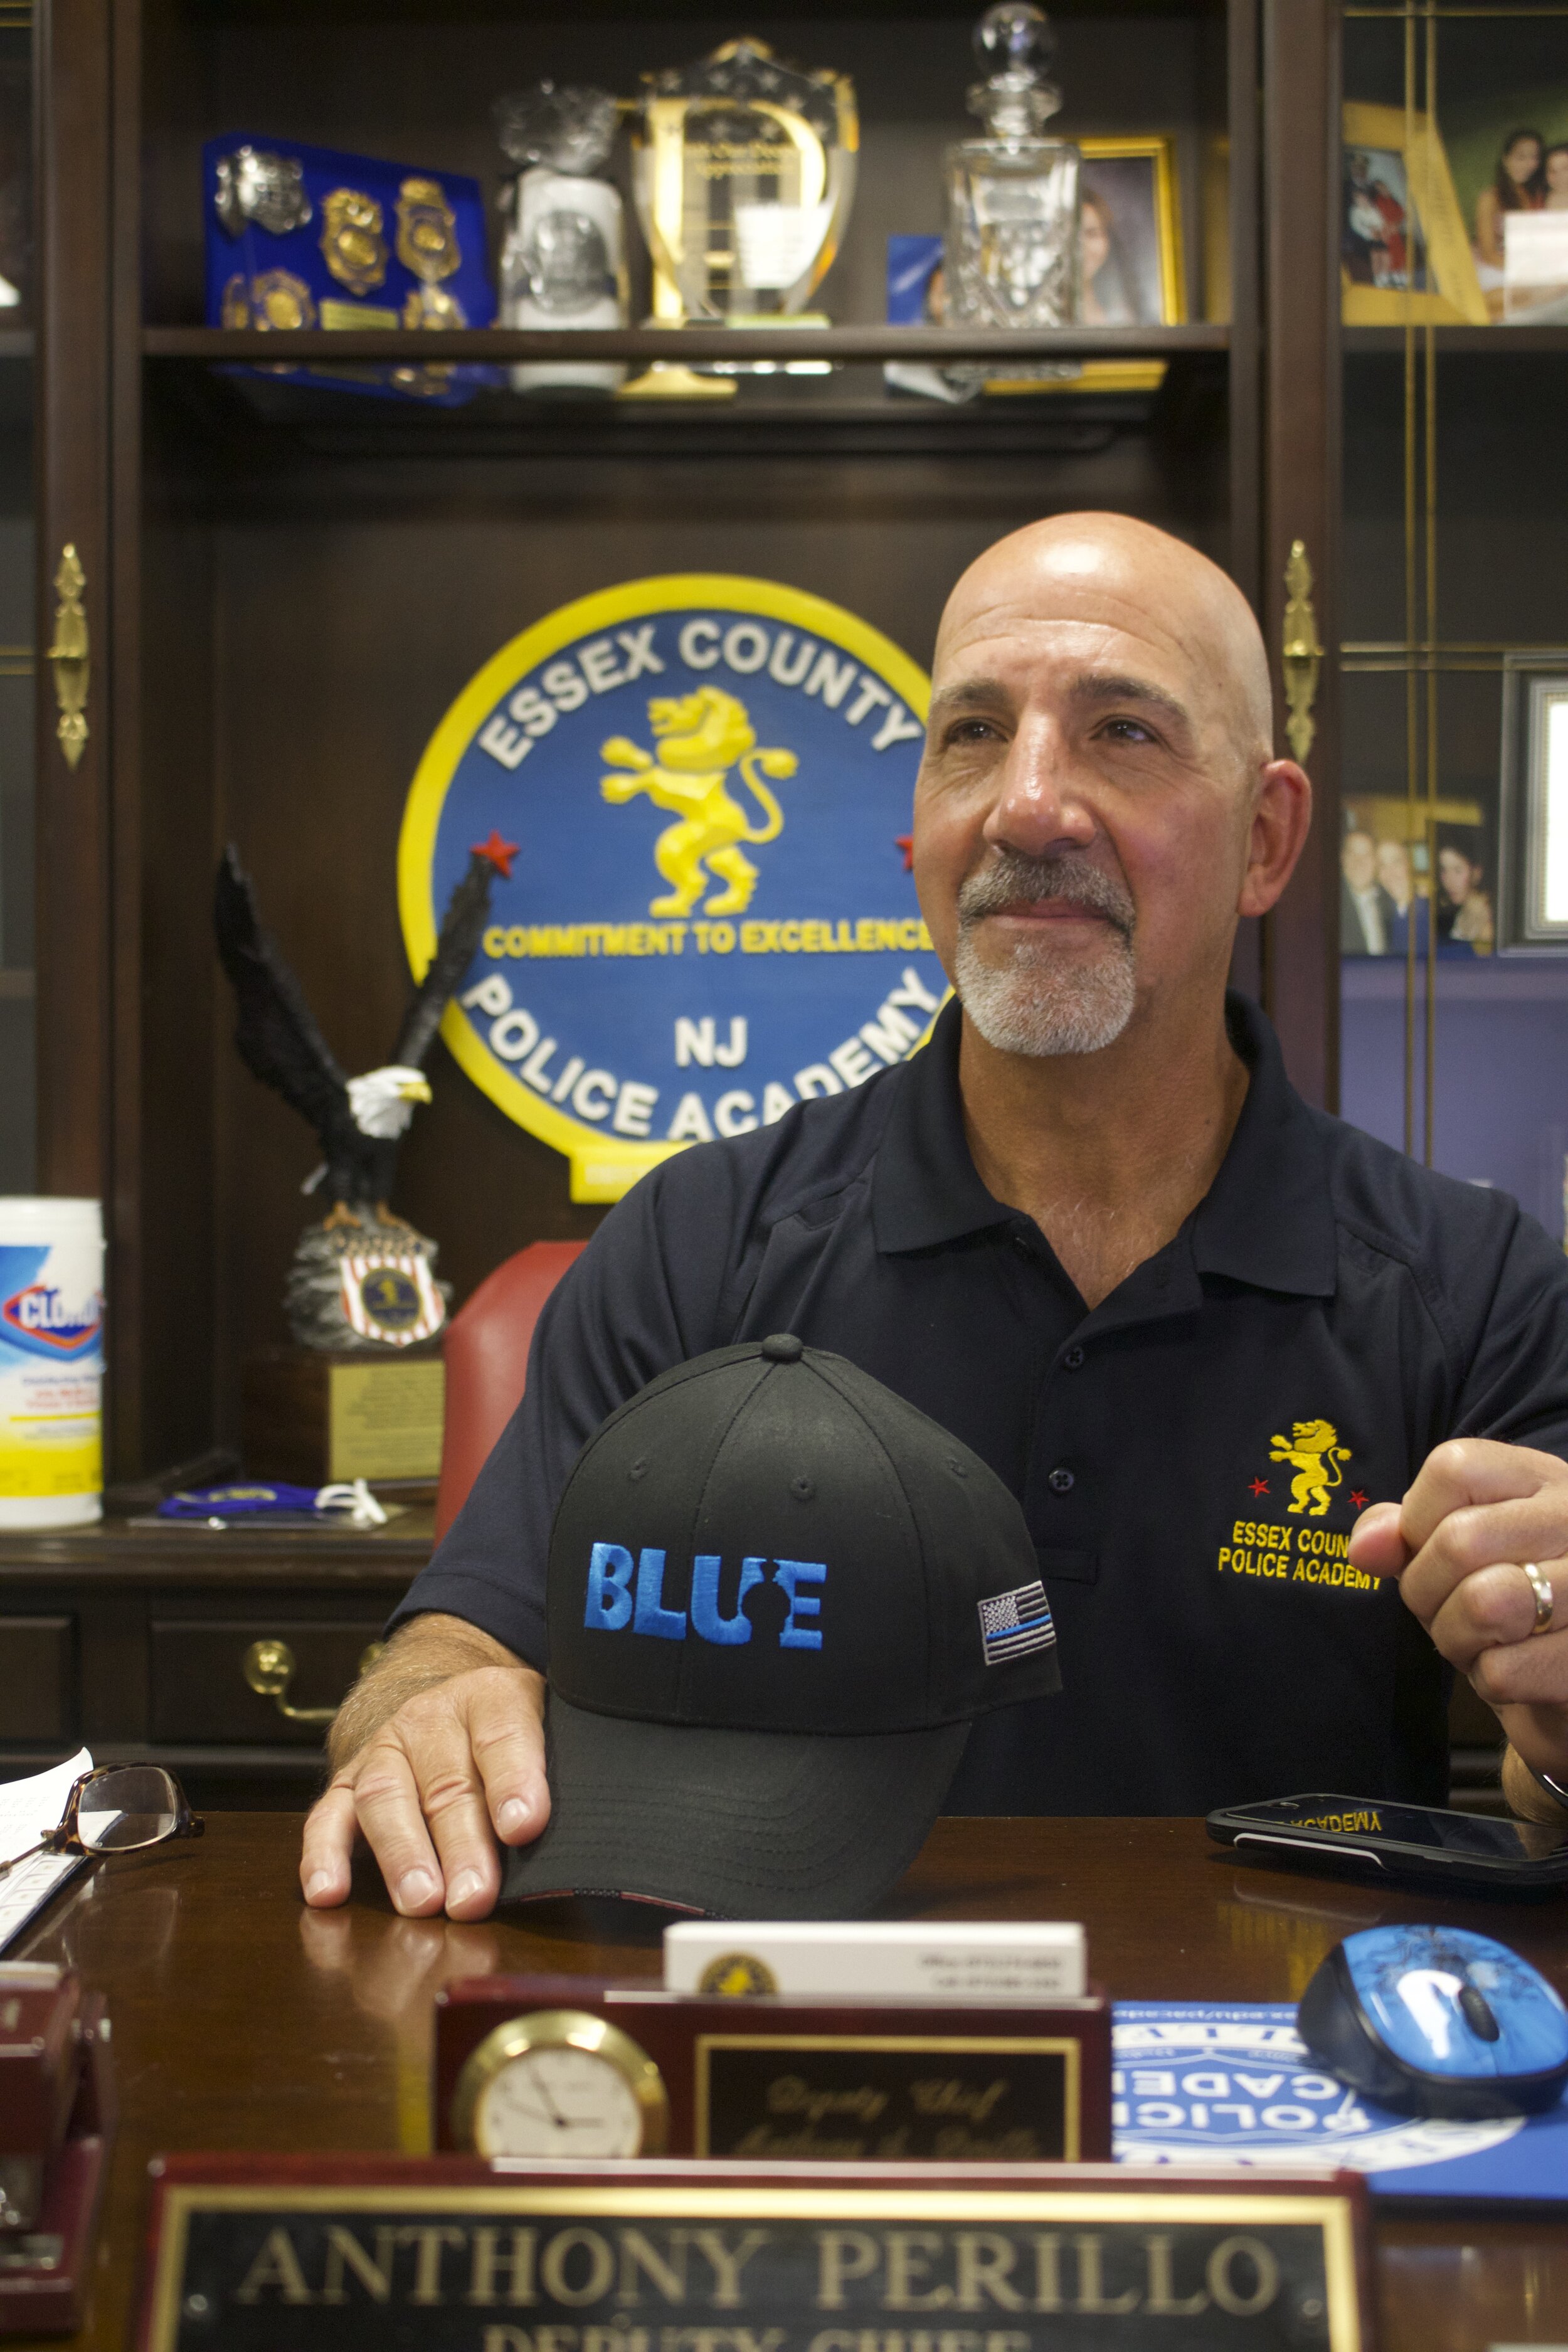 Exclusive Interview With Essex County New Jersey Police Academy Director Anthony Perillo